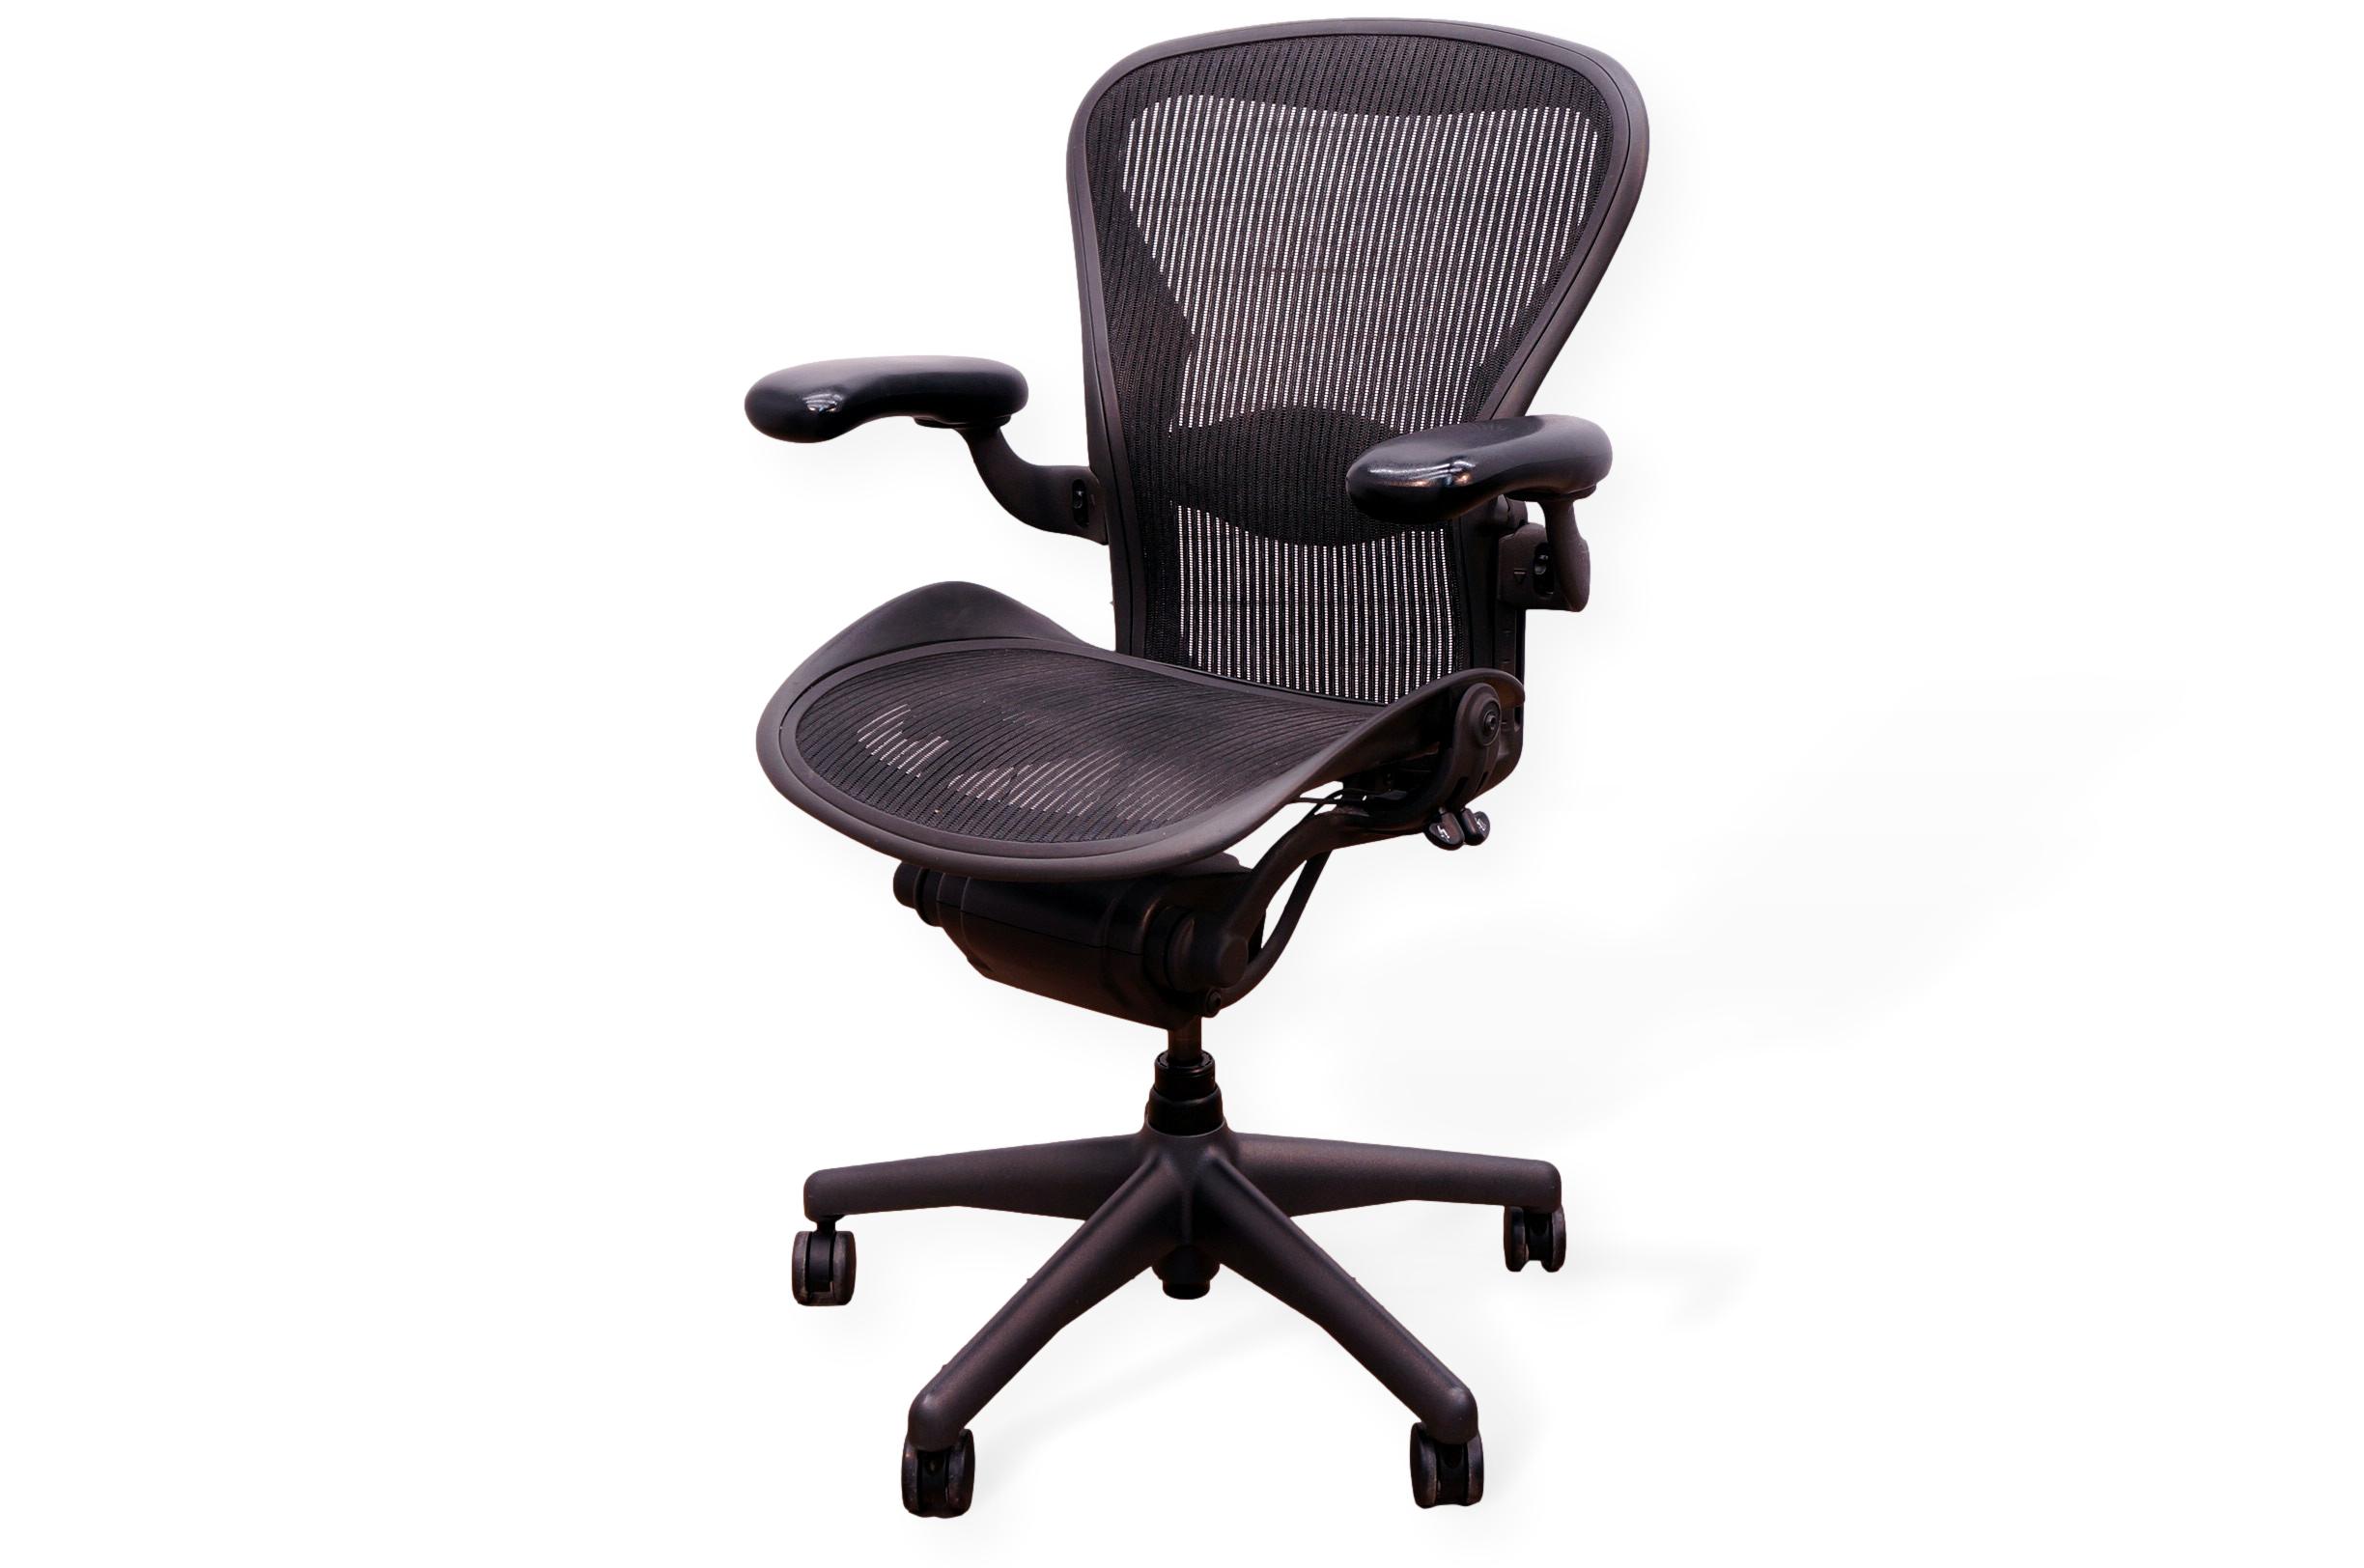 LUMBER SUPPORT Herman Miller Herman Miller Aeron Chair Size A FULLY LOADED 